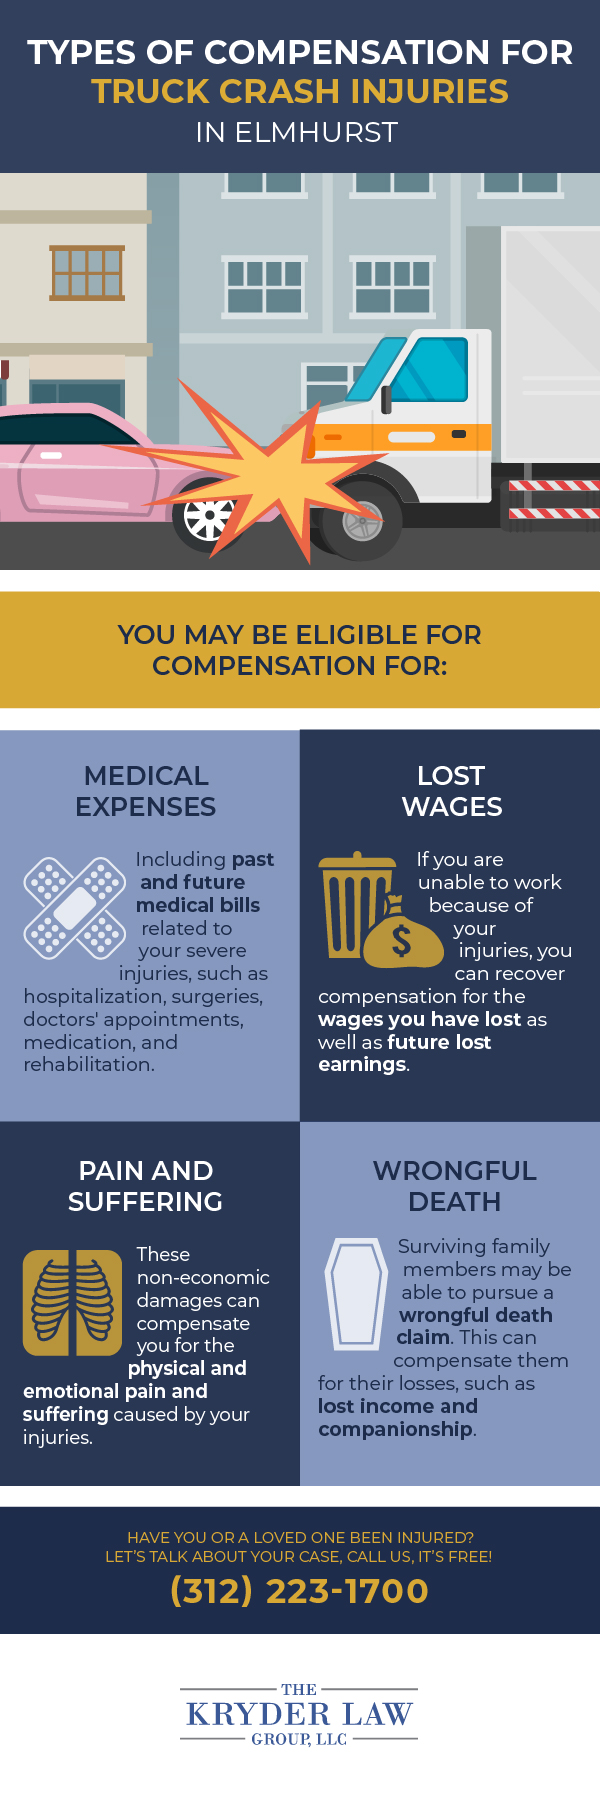 Types of Compensation for Truck Crash Injuries in Elmhurst Infographic